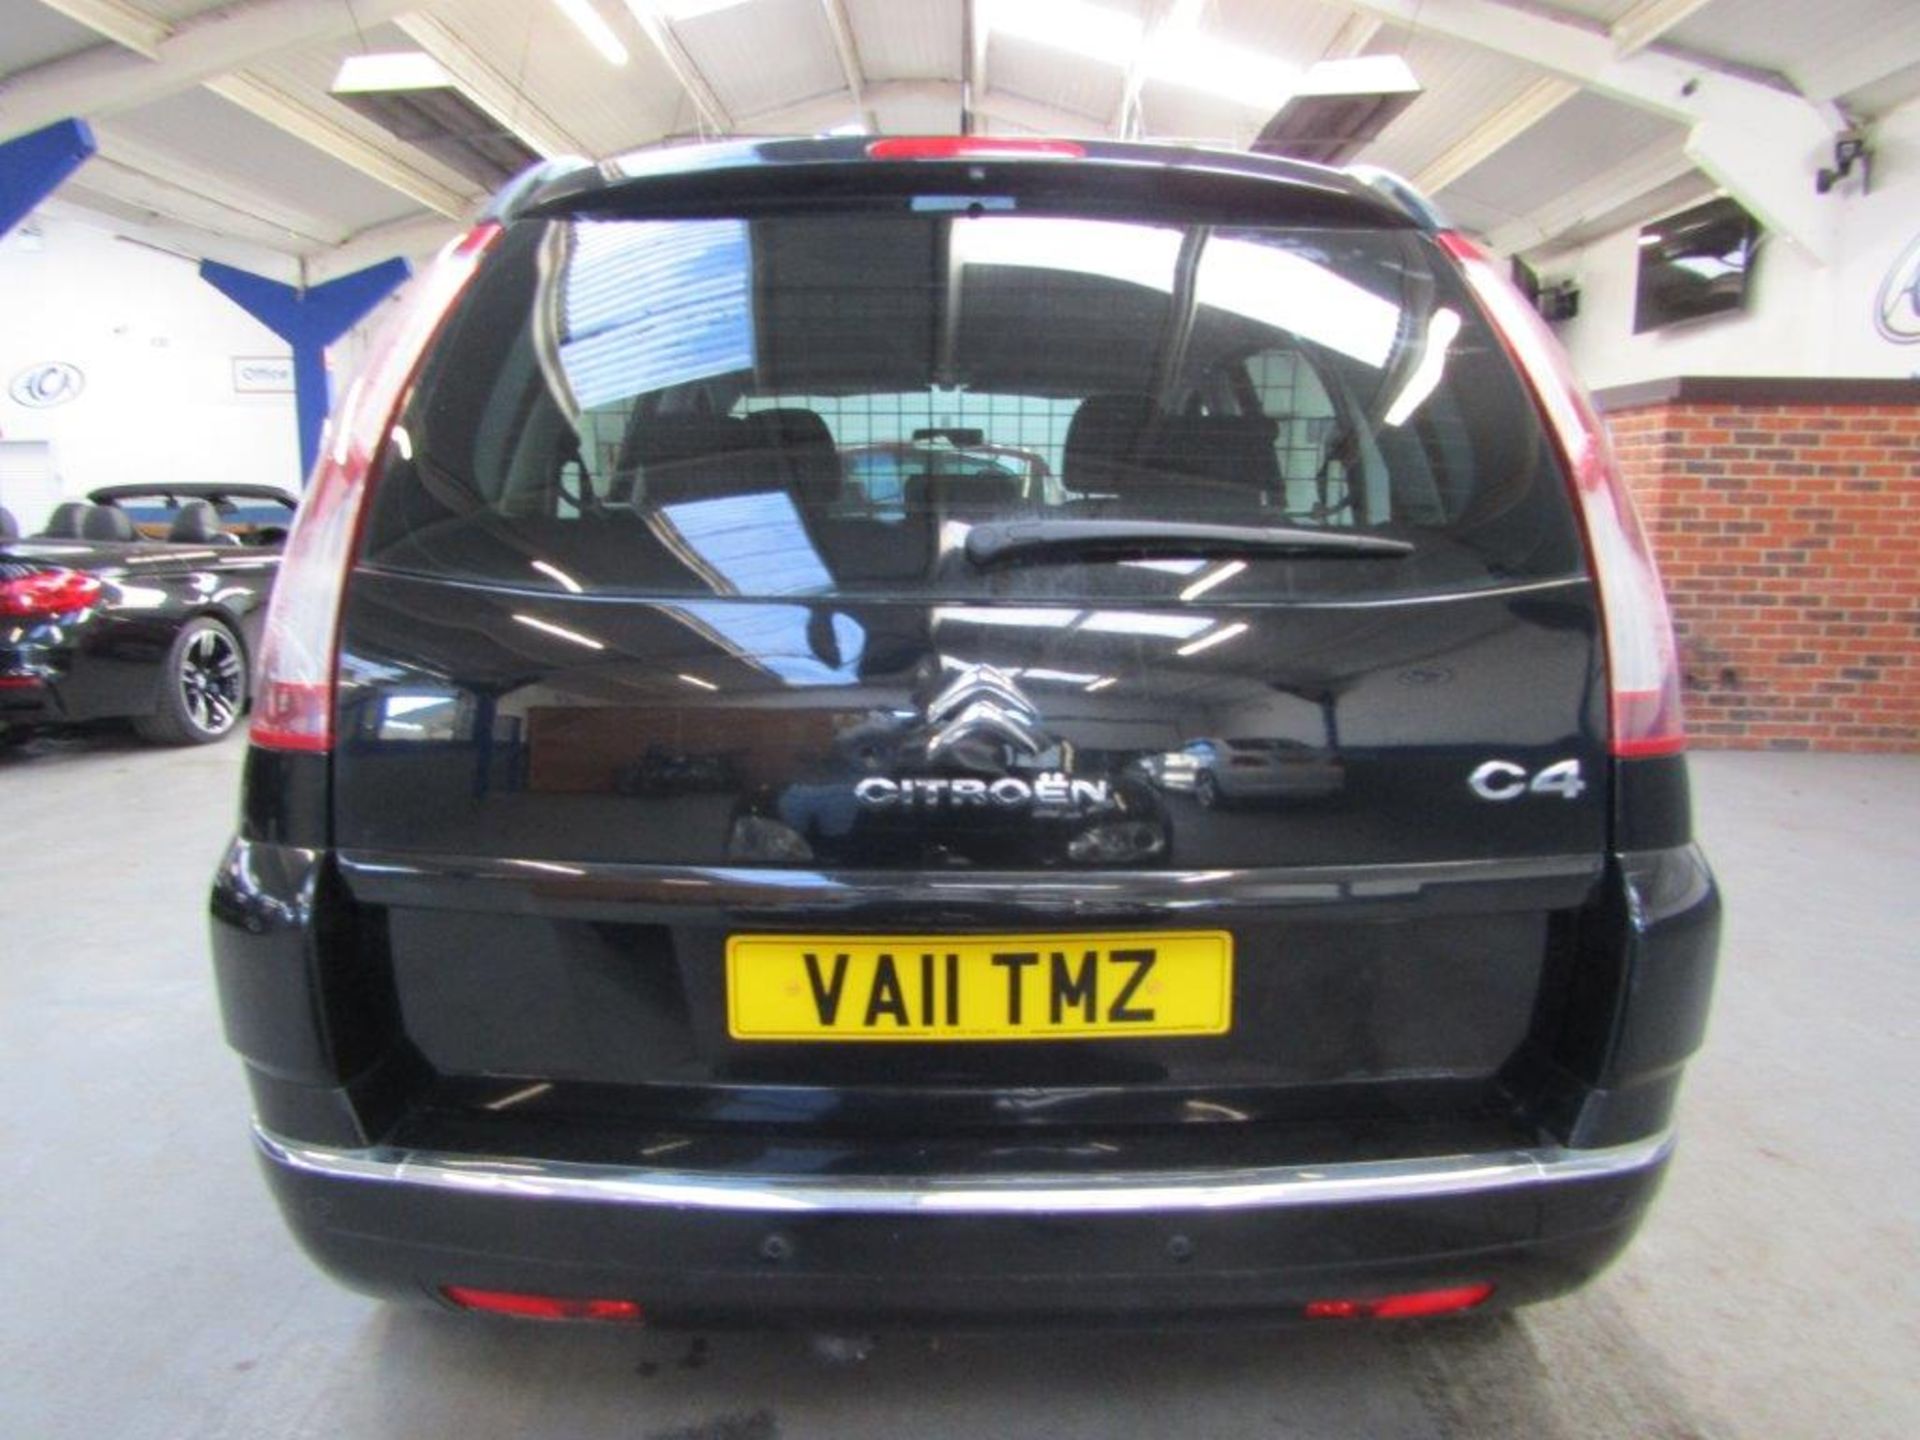 11 11 Citroen C4 G Picasso VTR+HDI - Image 7 of 21